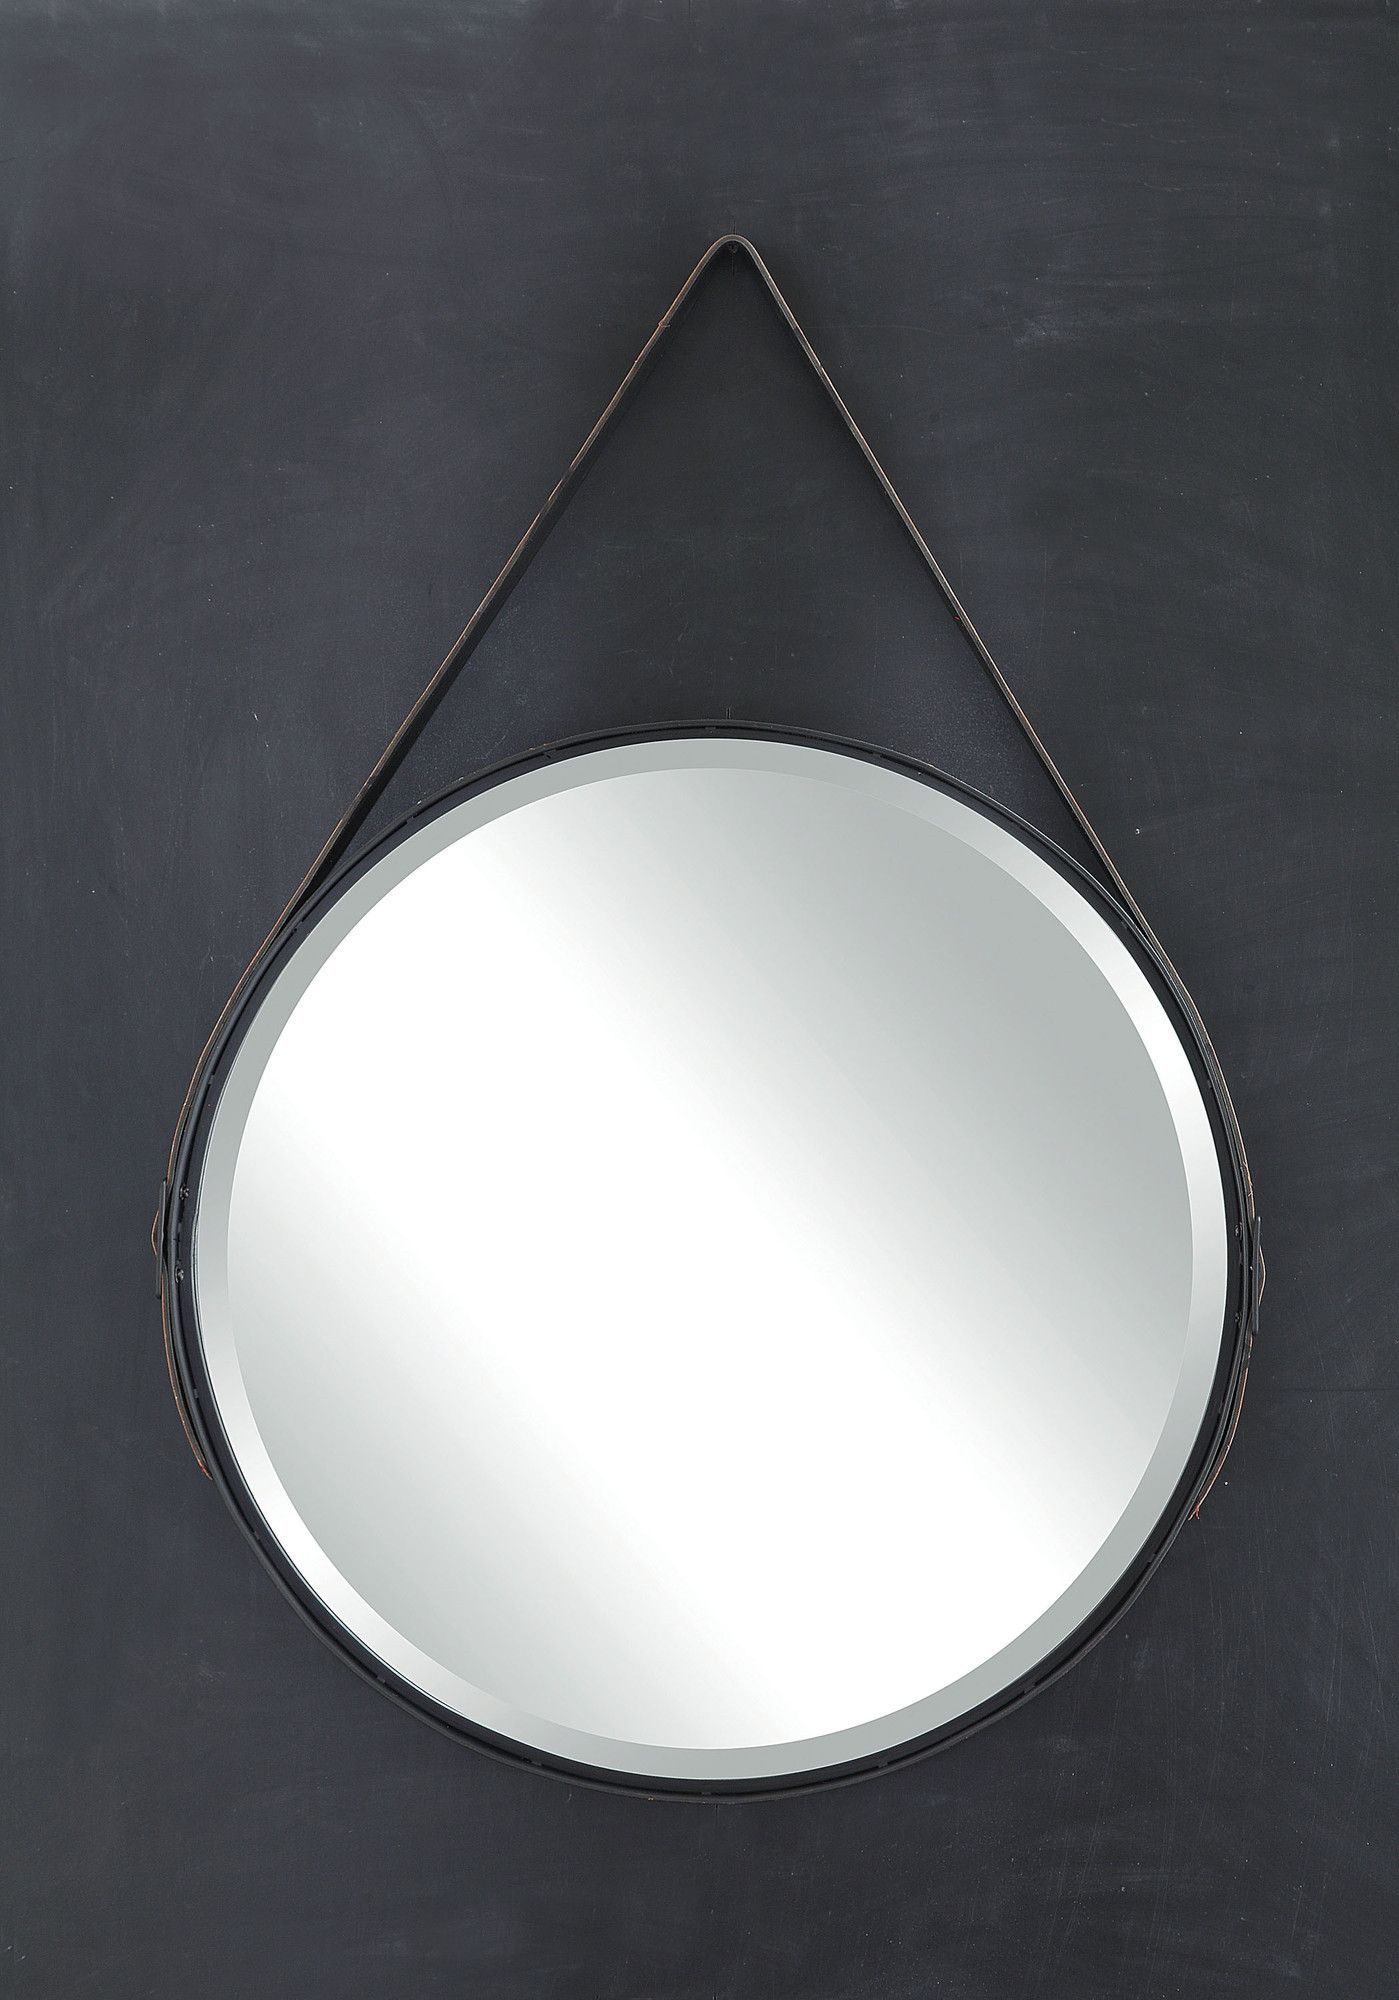 Round Mirror With Leather Strap | Mirrors With Leather Straps, Metal In Black Leather Strap Wall Mirrors (View 14 of 15)